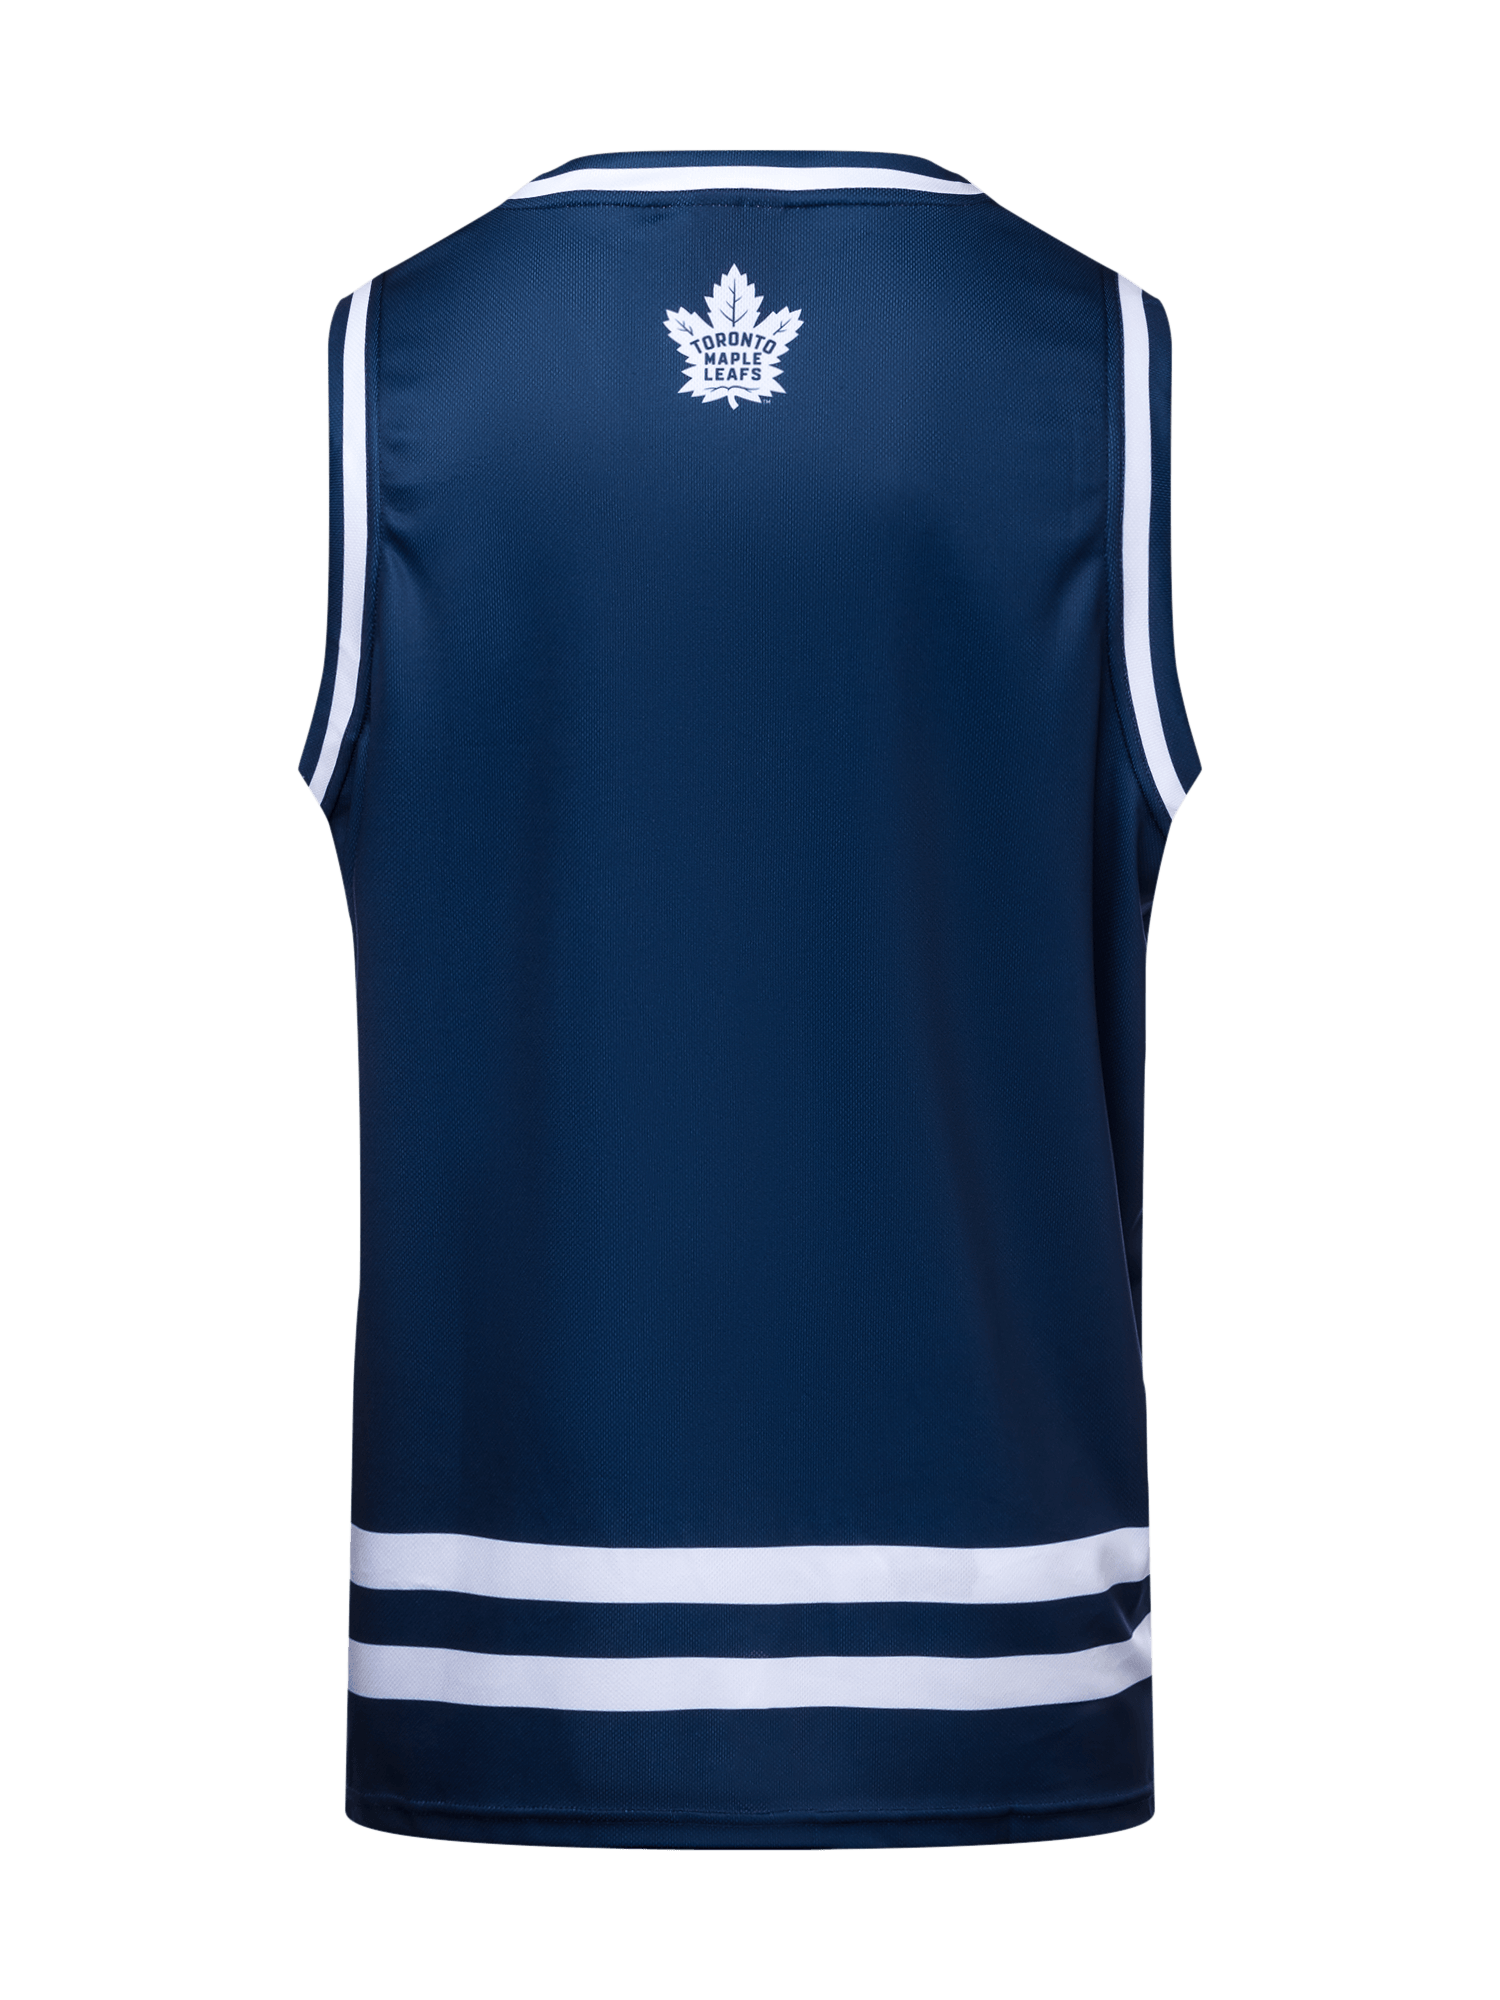 Toronto Maple Leafs on X: The #Leafs will wear these St